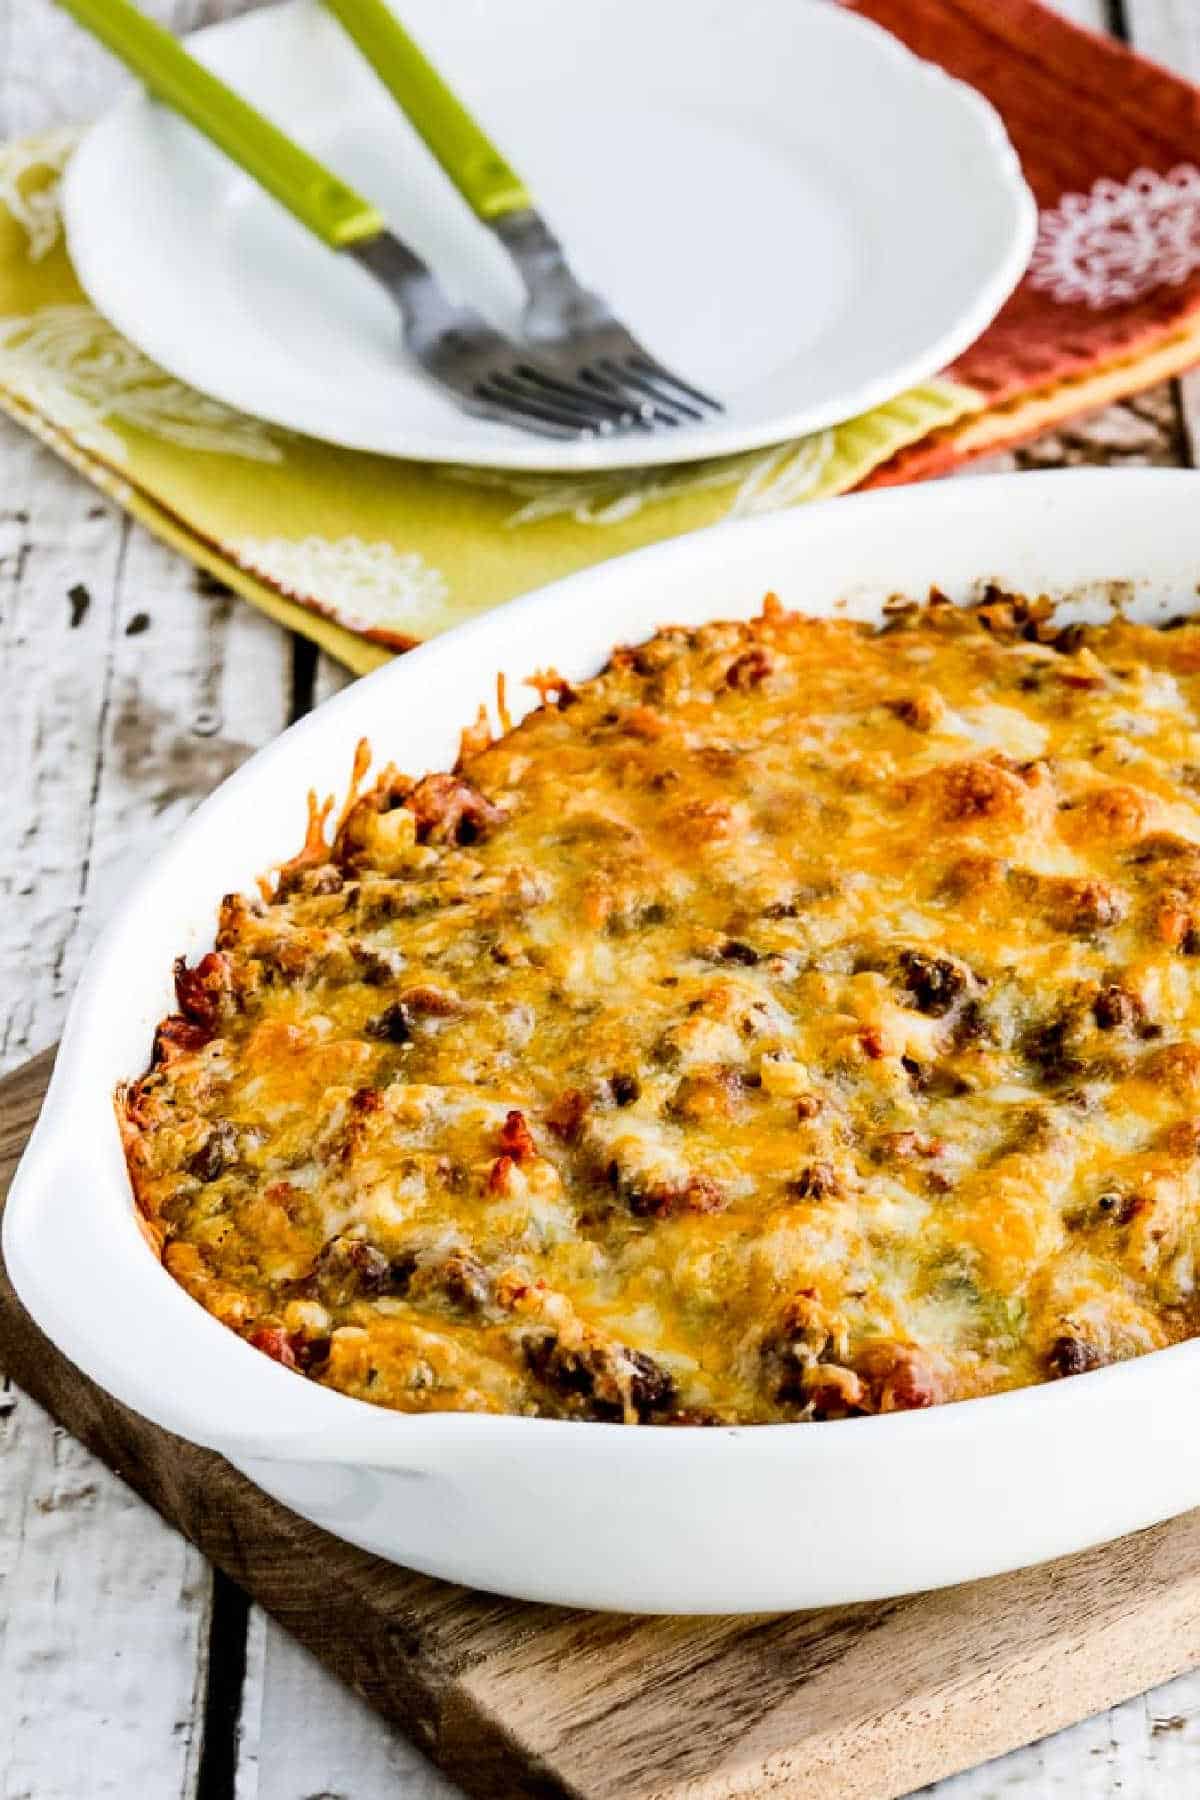 Cheesy low carb taco casserole in a baking dish shown on a napkin